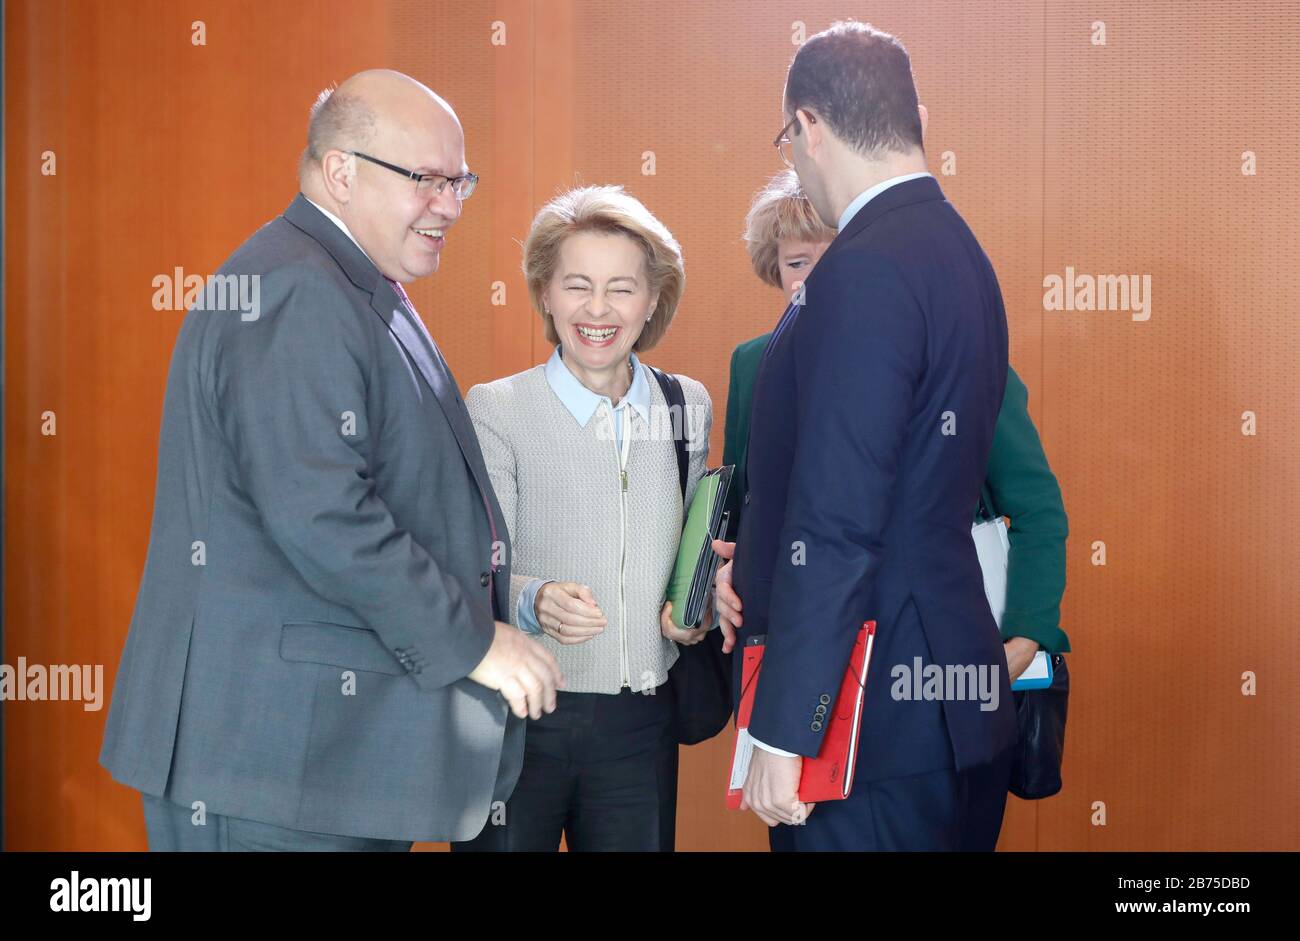 Federal Minister of Economics and Energy Peter Altmaier, CDU, left, laughs before a cabinet meeting in the Chancellor's Office with Federal Minister of Defense Ursula von der Leyen, CDU, center, State Minister of Culture Monika Grueters, CDU, and Federal Minister of Health Jens Spahn, CDU. [automated translation] Stock Photo